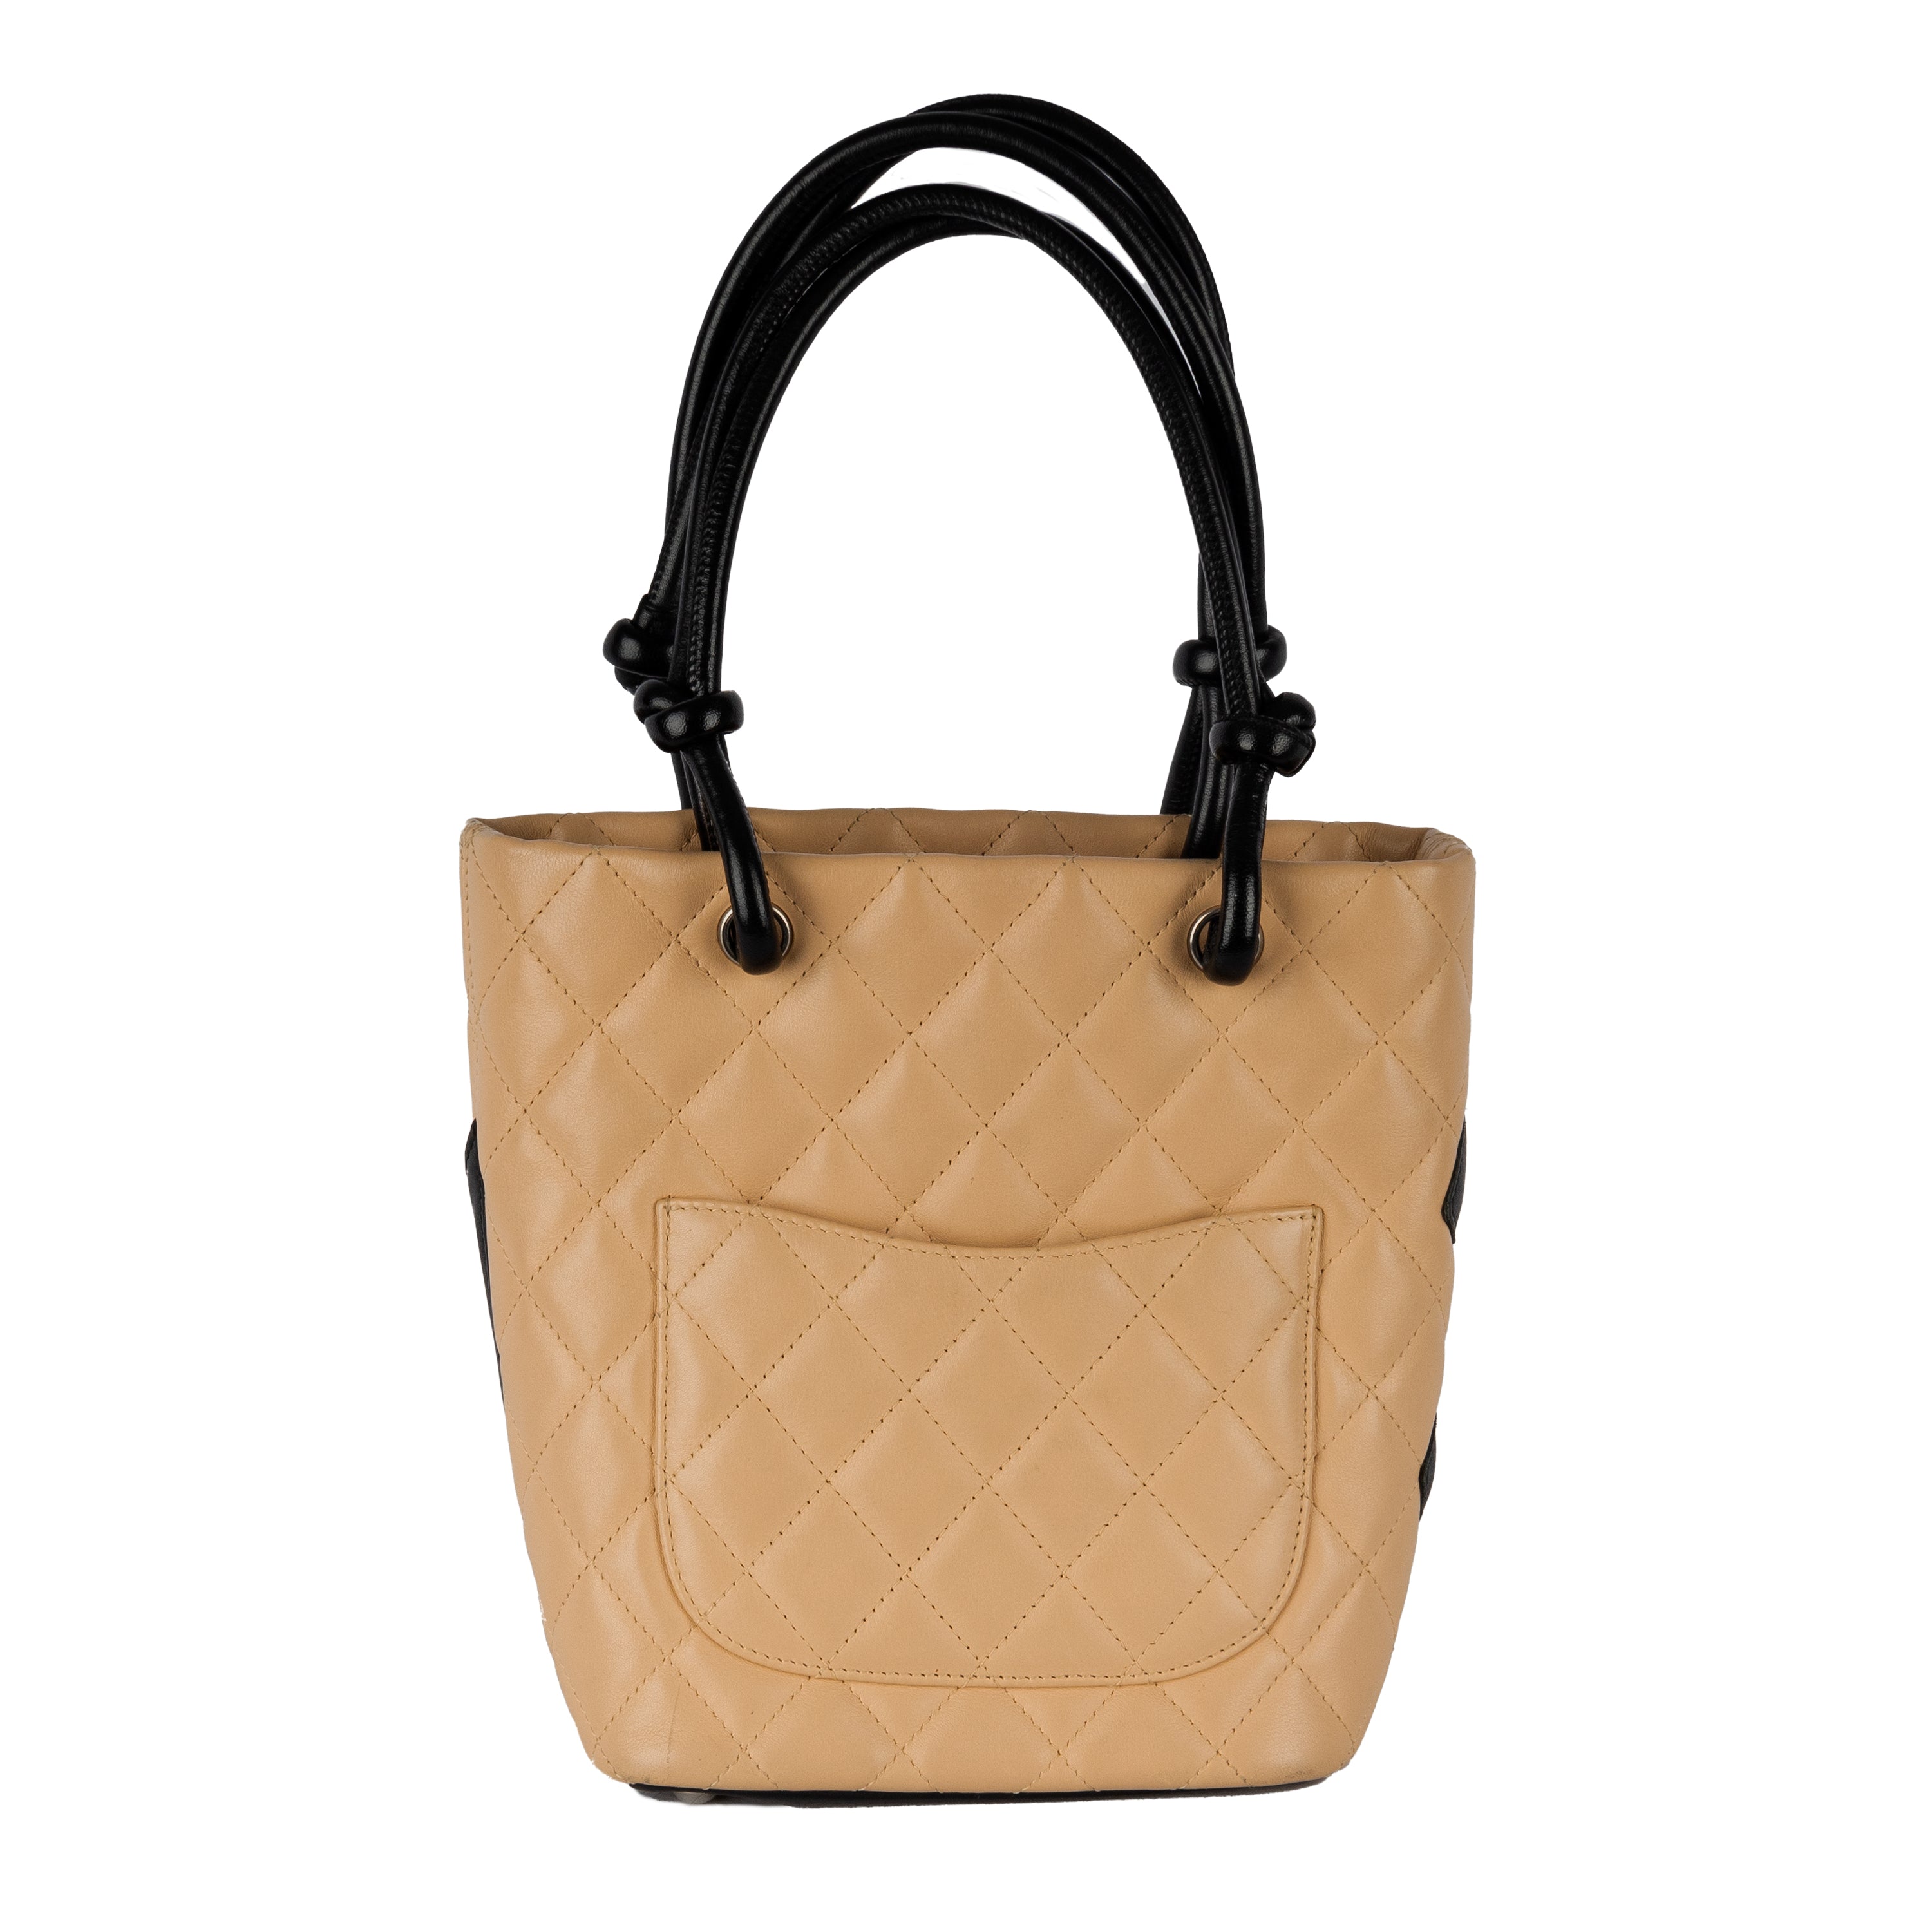 Chanel Beige Quilted Cambon Tote Bag 109cas72